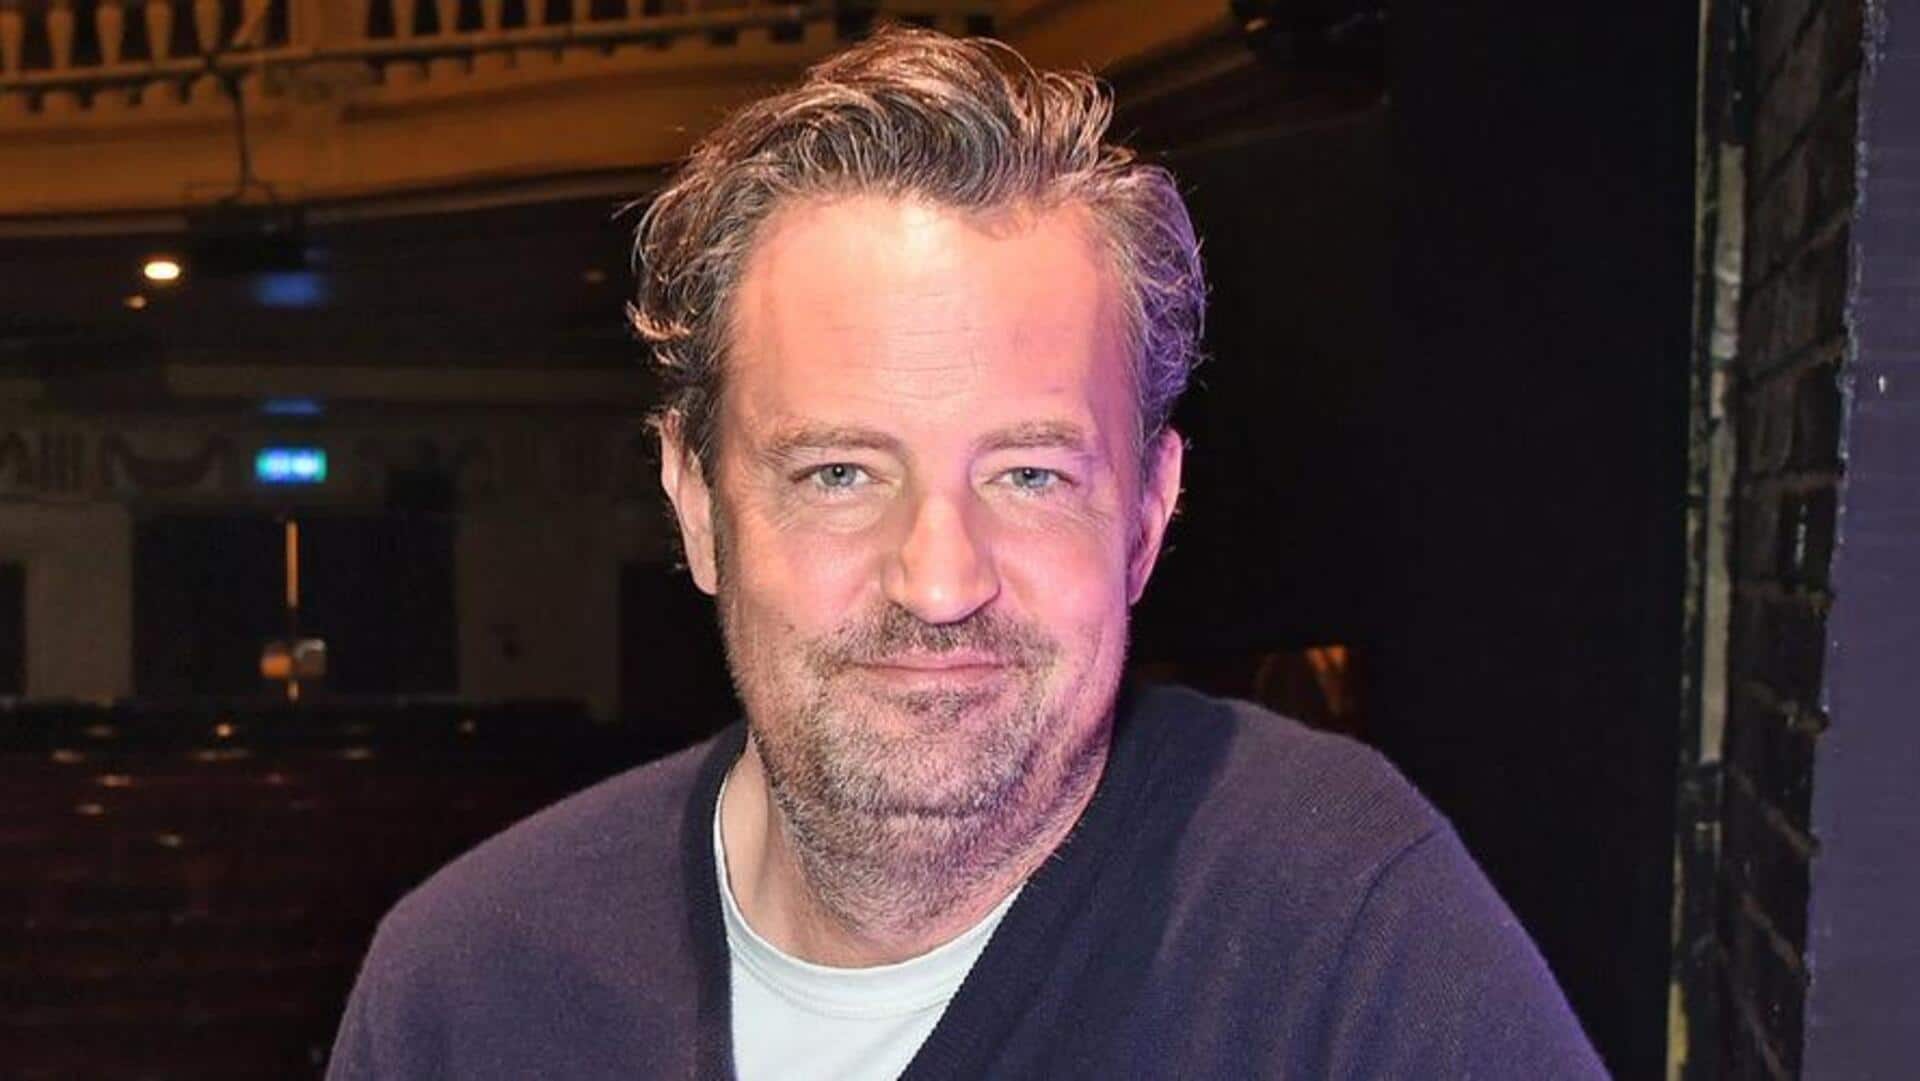 'F.R.I.E.N.D.S' star Matthew Perry's cause of death remains mystery